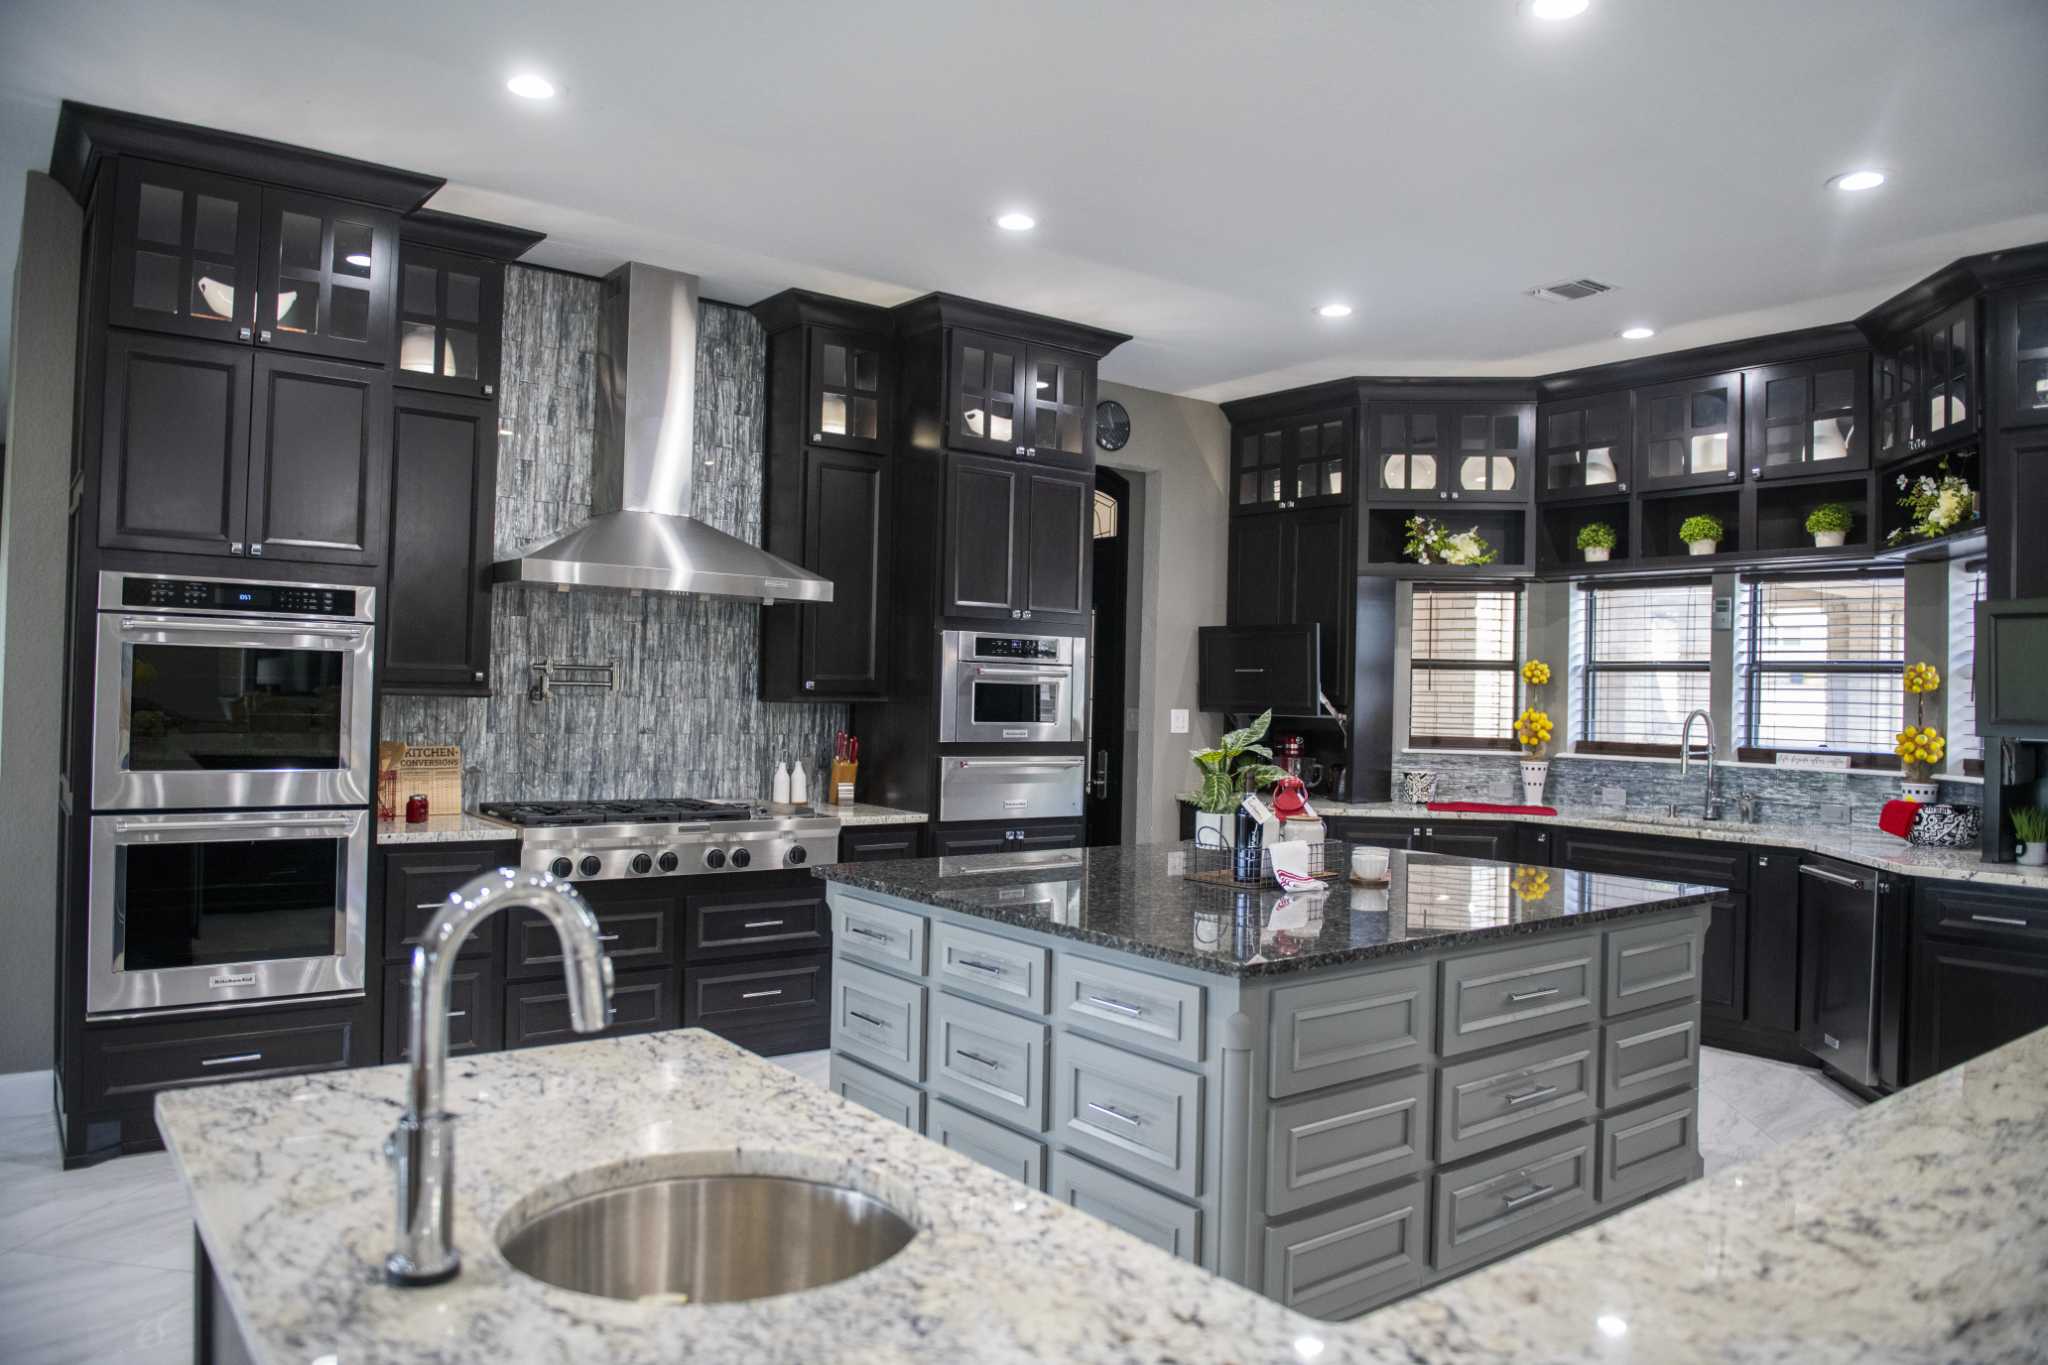 Greg and Vanessa Douglas incorporated some of the latest trends in kitchen cabinets when they renovated their kitchen in their home in Garden Ridge.